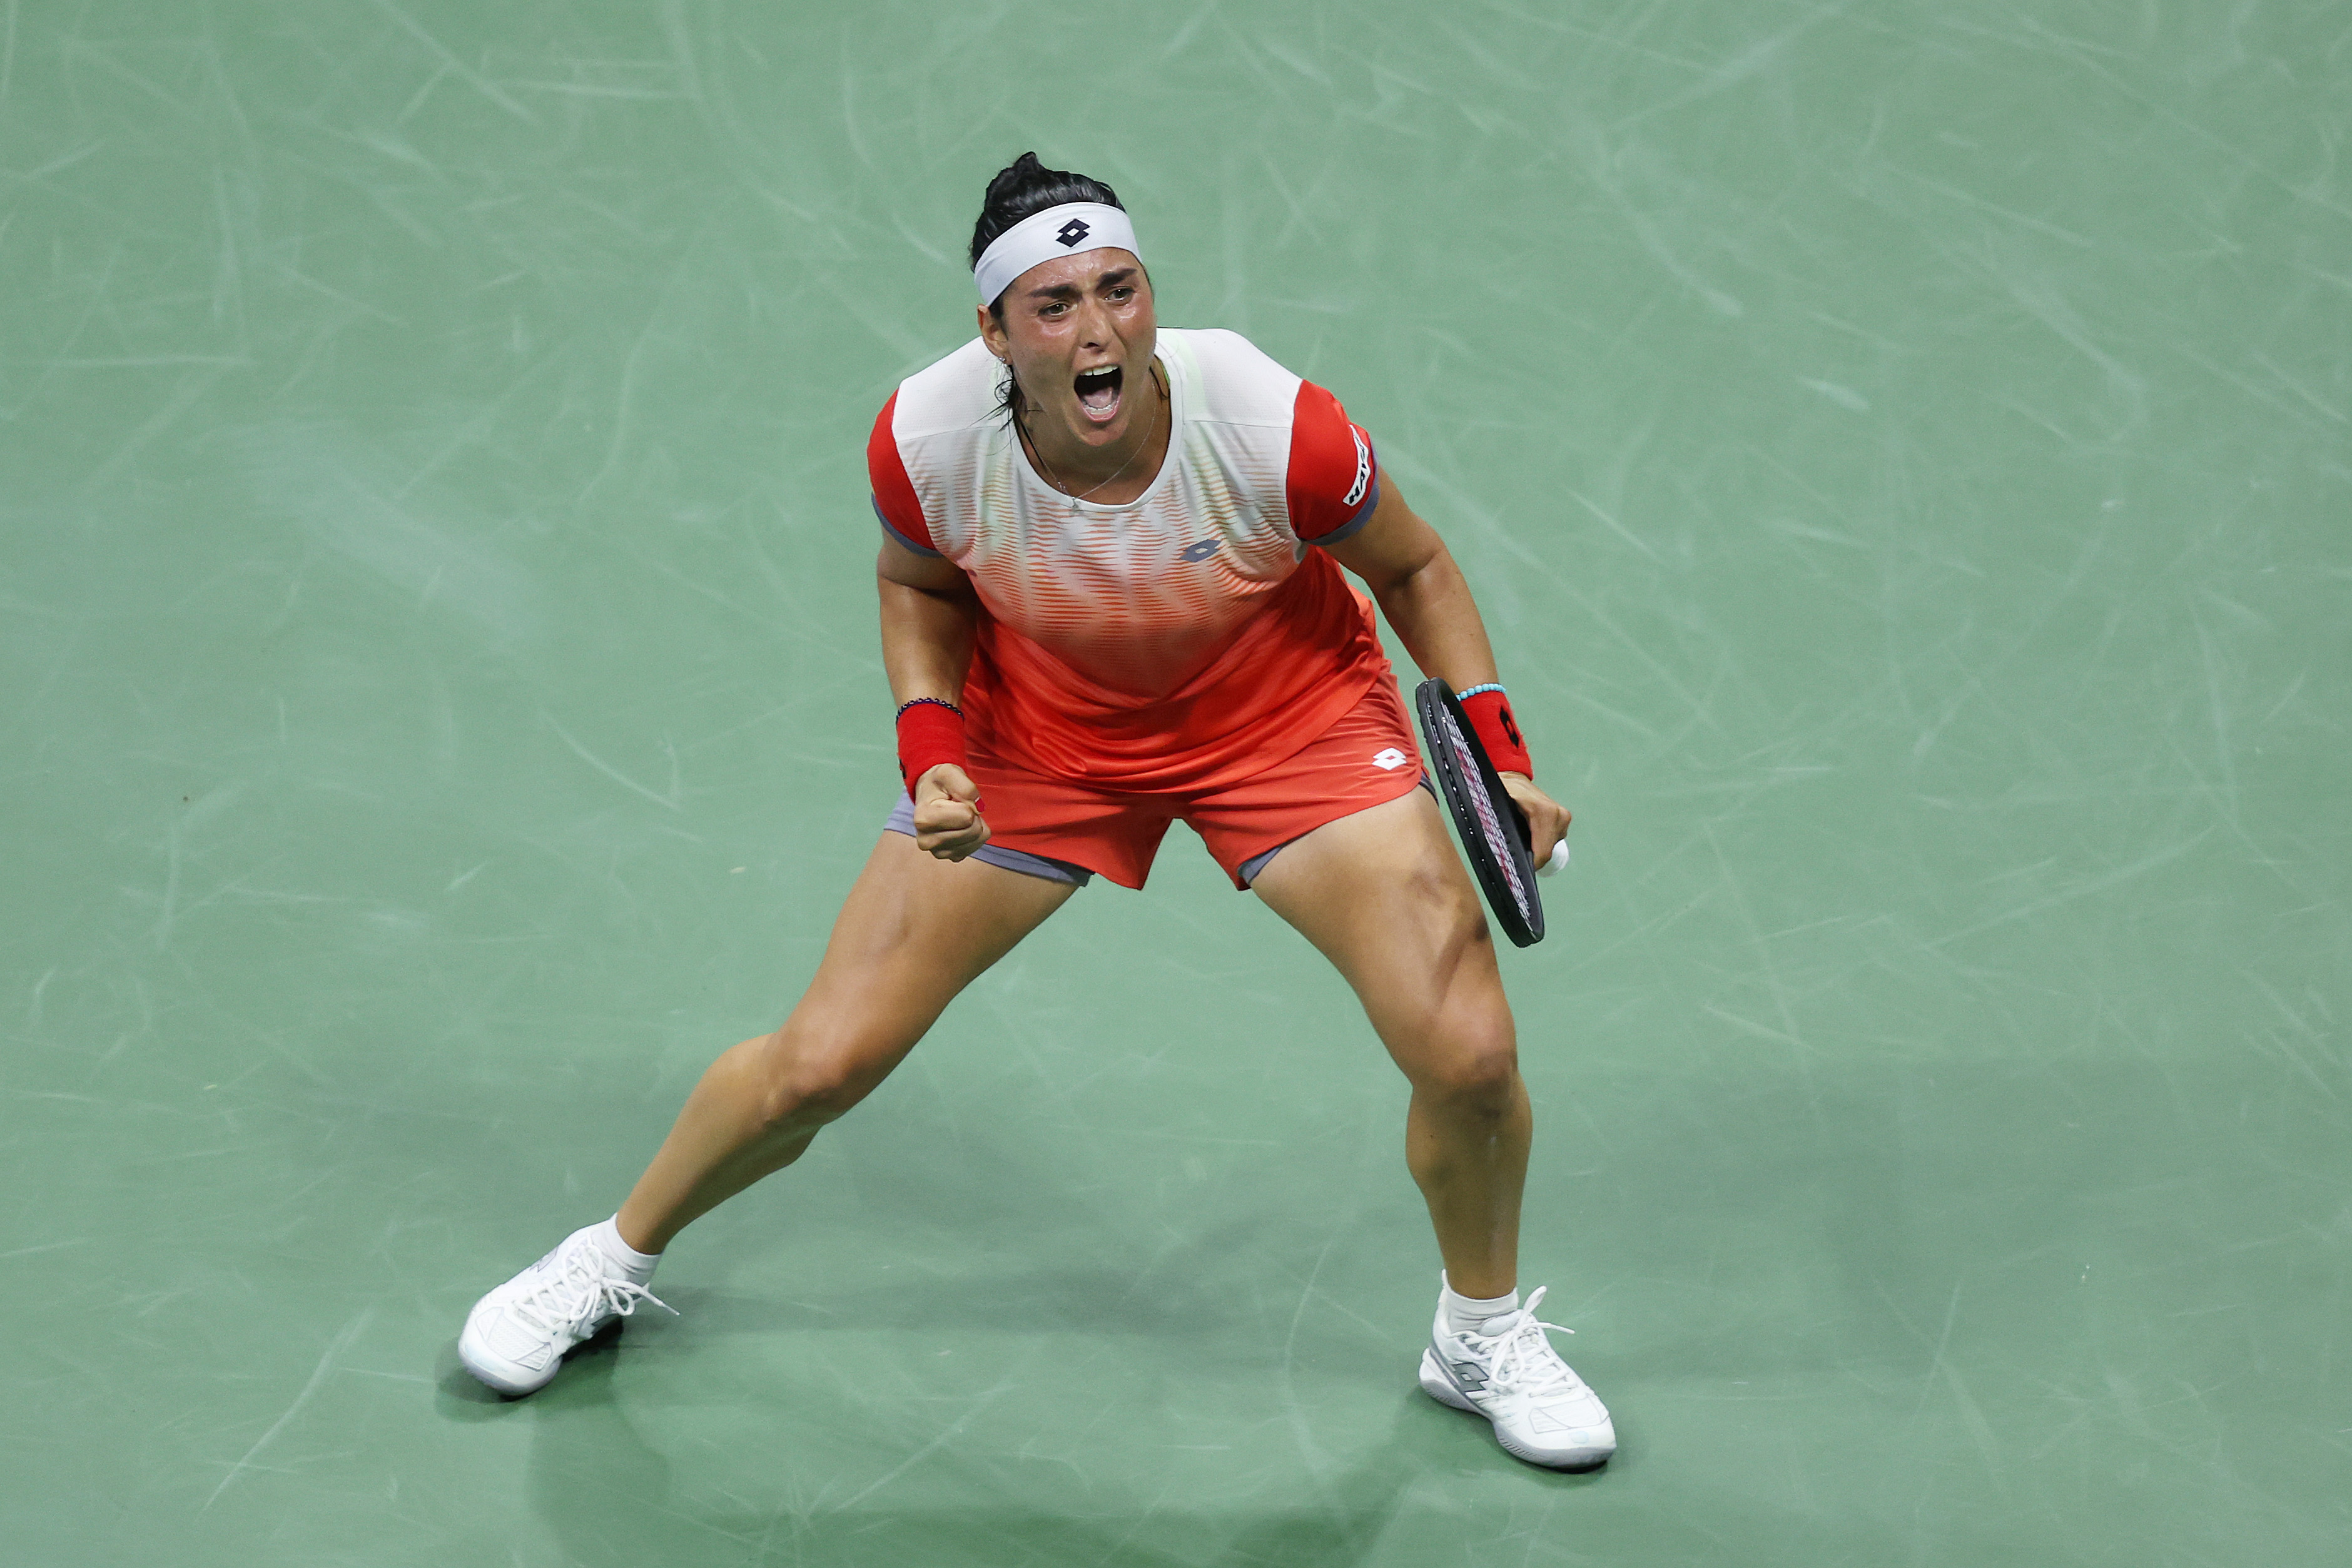 Ons Jabeur of Tunisia celebrates after defeating Caroline Garcia of France during their Women’s Singles Semifinal match on Day Eleven of the 2022 US Open at USTA Billie Jean King National Tennis Center on September 08, 2022 in the Flushing neighborhood of the Queens borough of New York City.